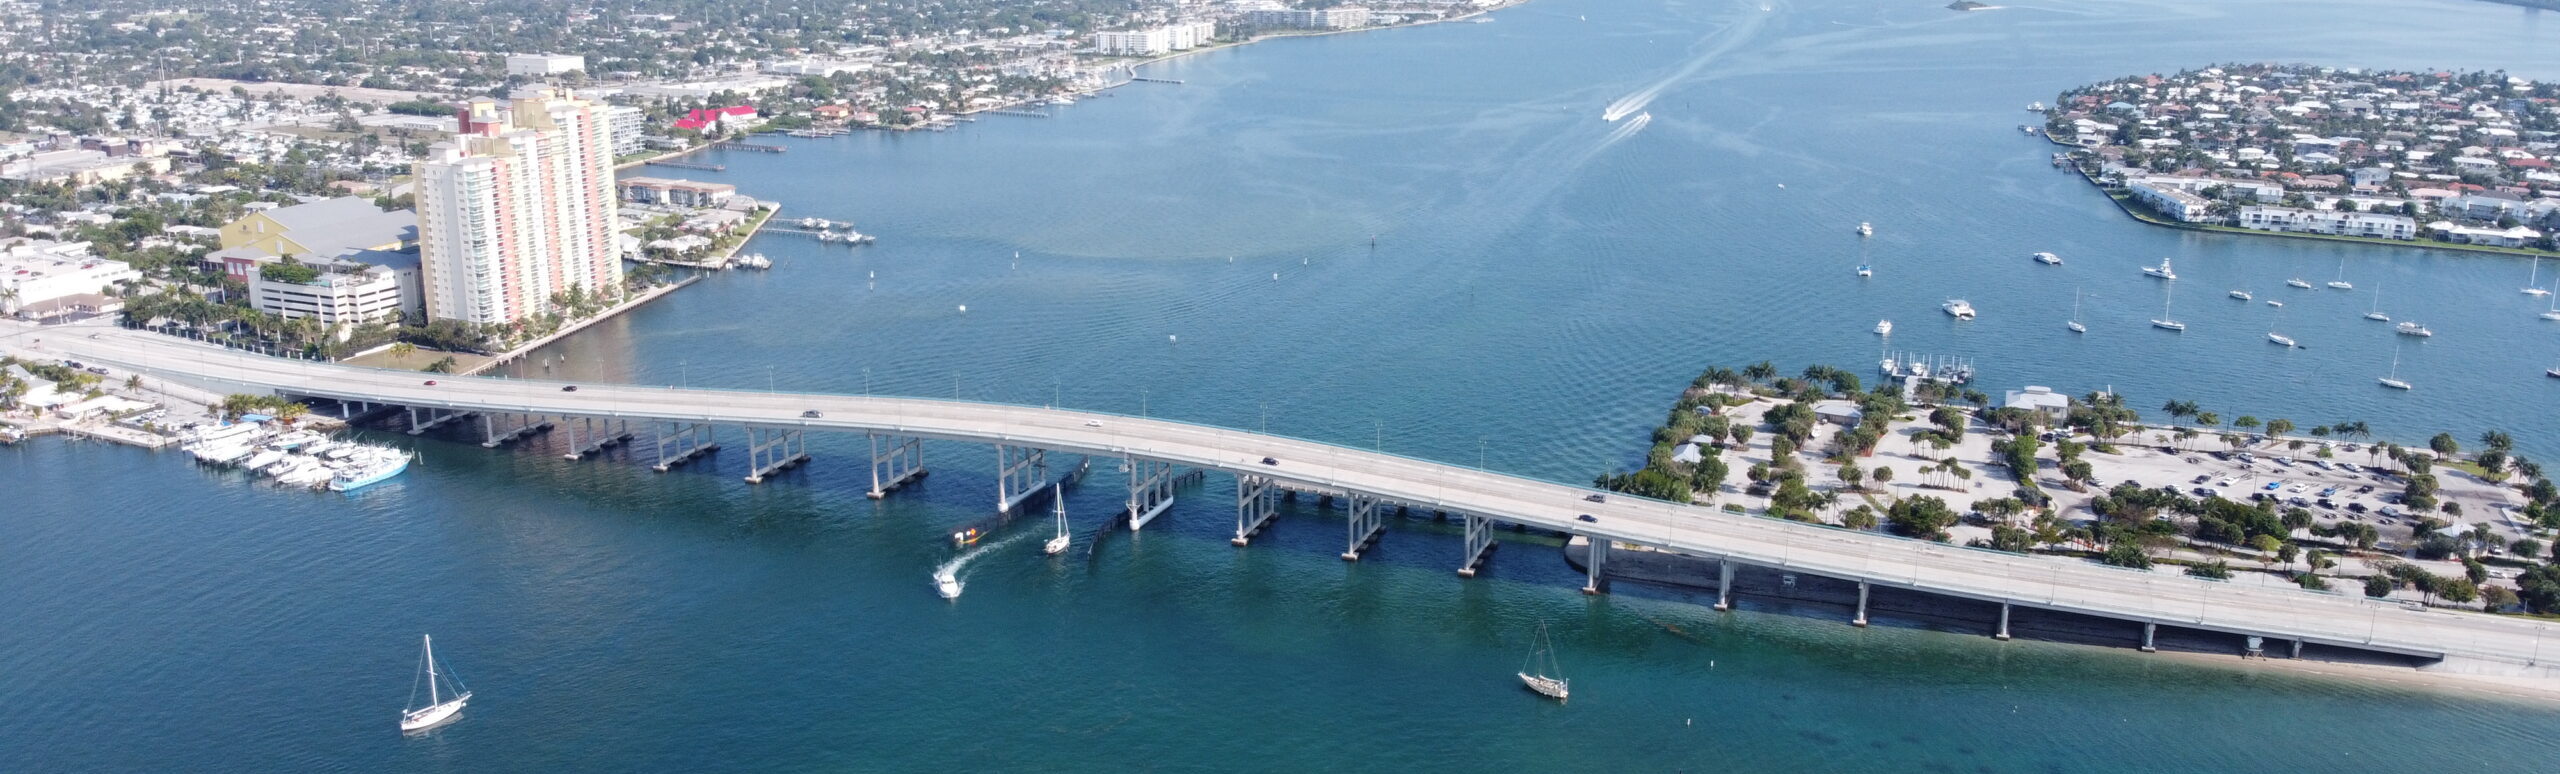 Everything You Need To Know To Dive The Blue Heron Bridge